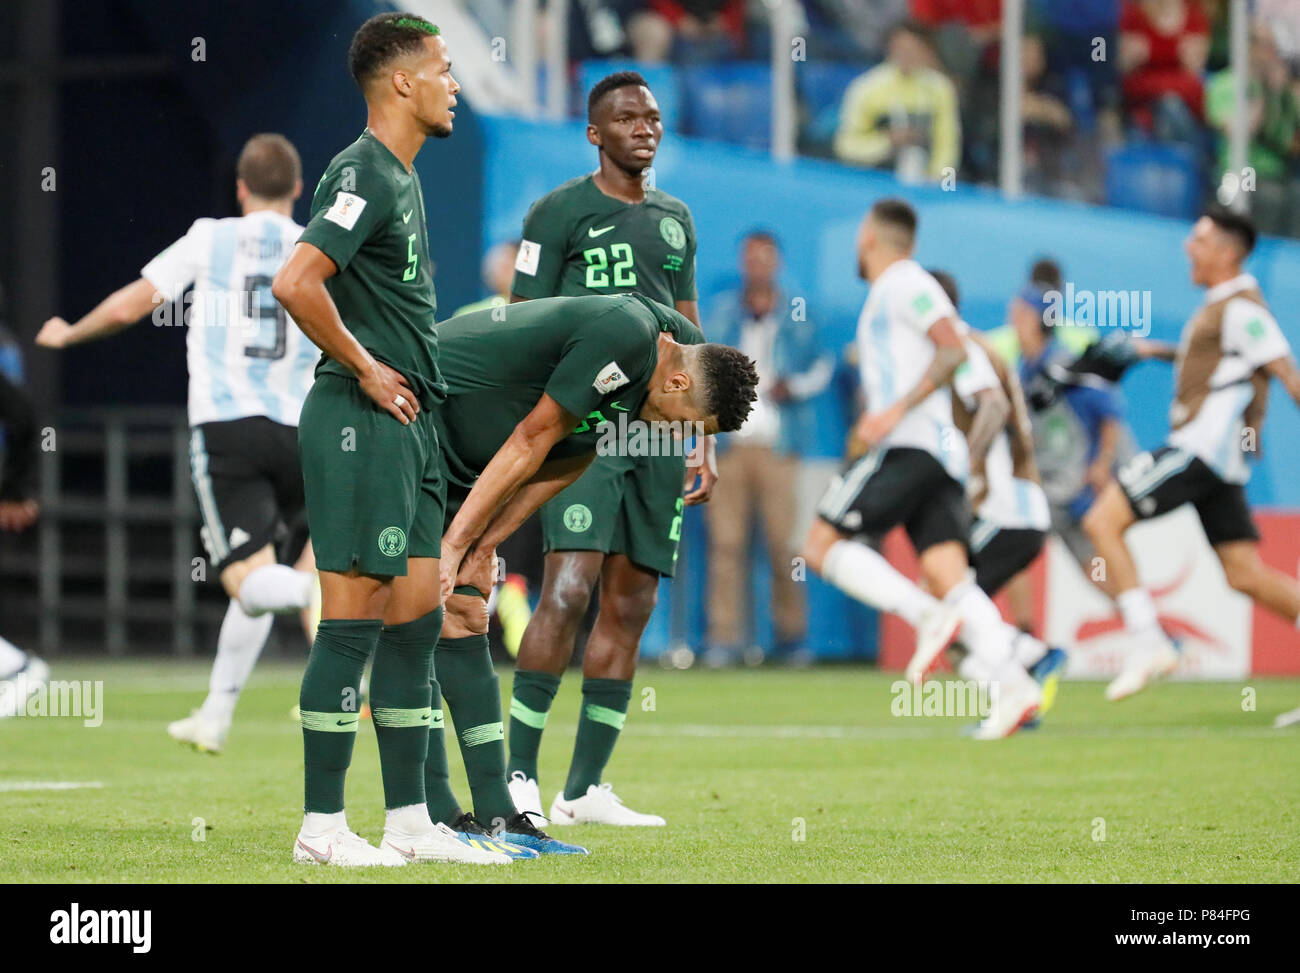 SAINT PETERSBURG, RUSSIA - JUNE 26: (L to R) William Ekong, Leon Balogun and Kenneth Omeruo of Nigeria national team react as Argentina national team players celebrate a goal in background during the 2018 FIFA World Cup Russia group D match between Nigeria and Argentina at Saint Petersburg Stadium on June 26, 2018 in Saint Petersburg, Russia. (MB Media) Stock Photo